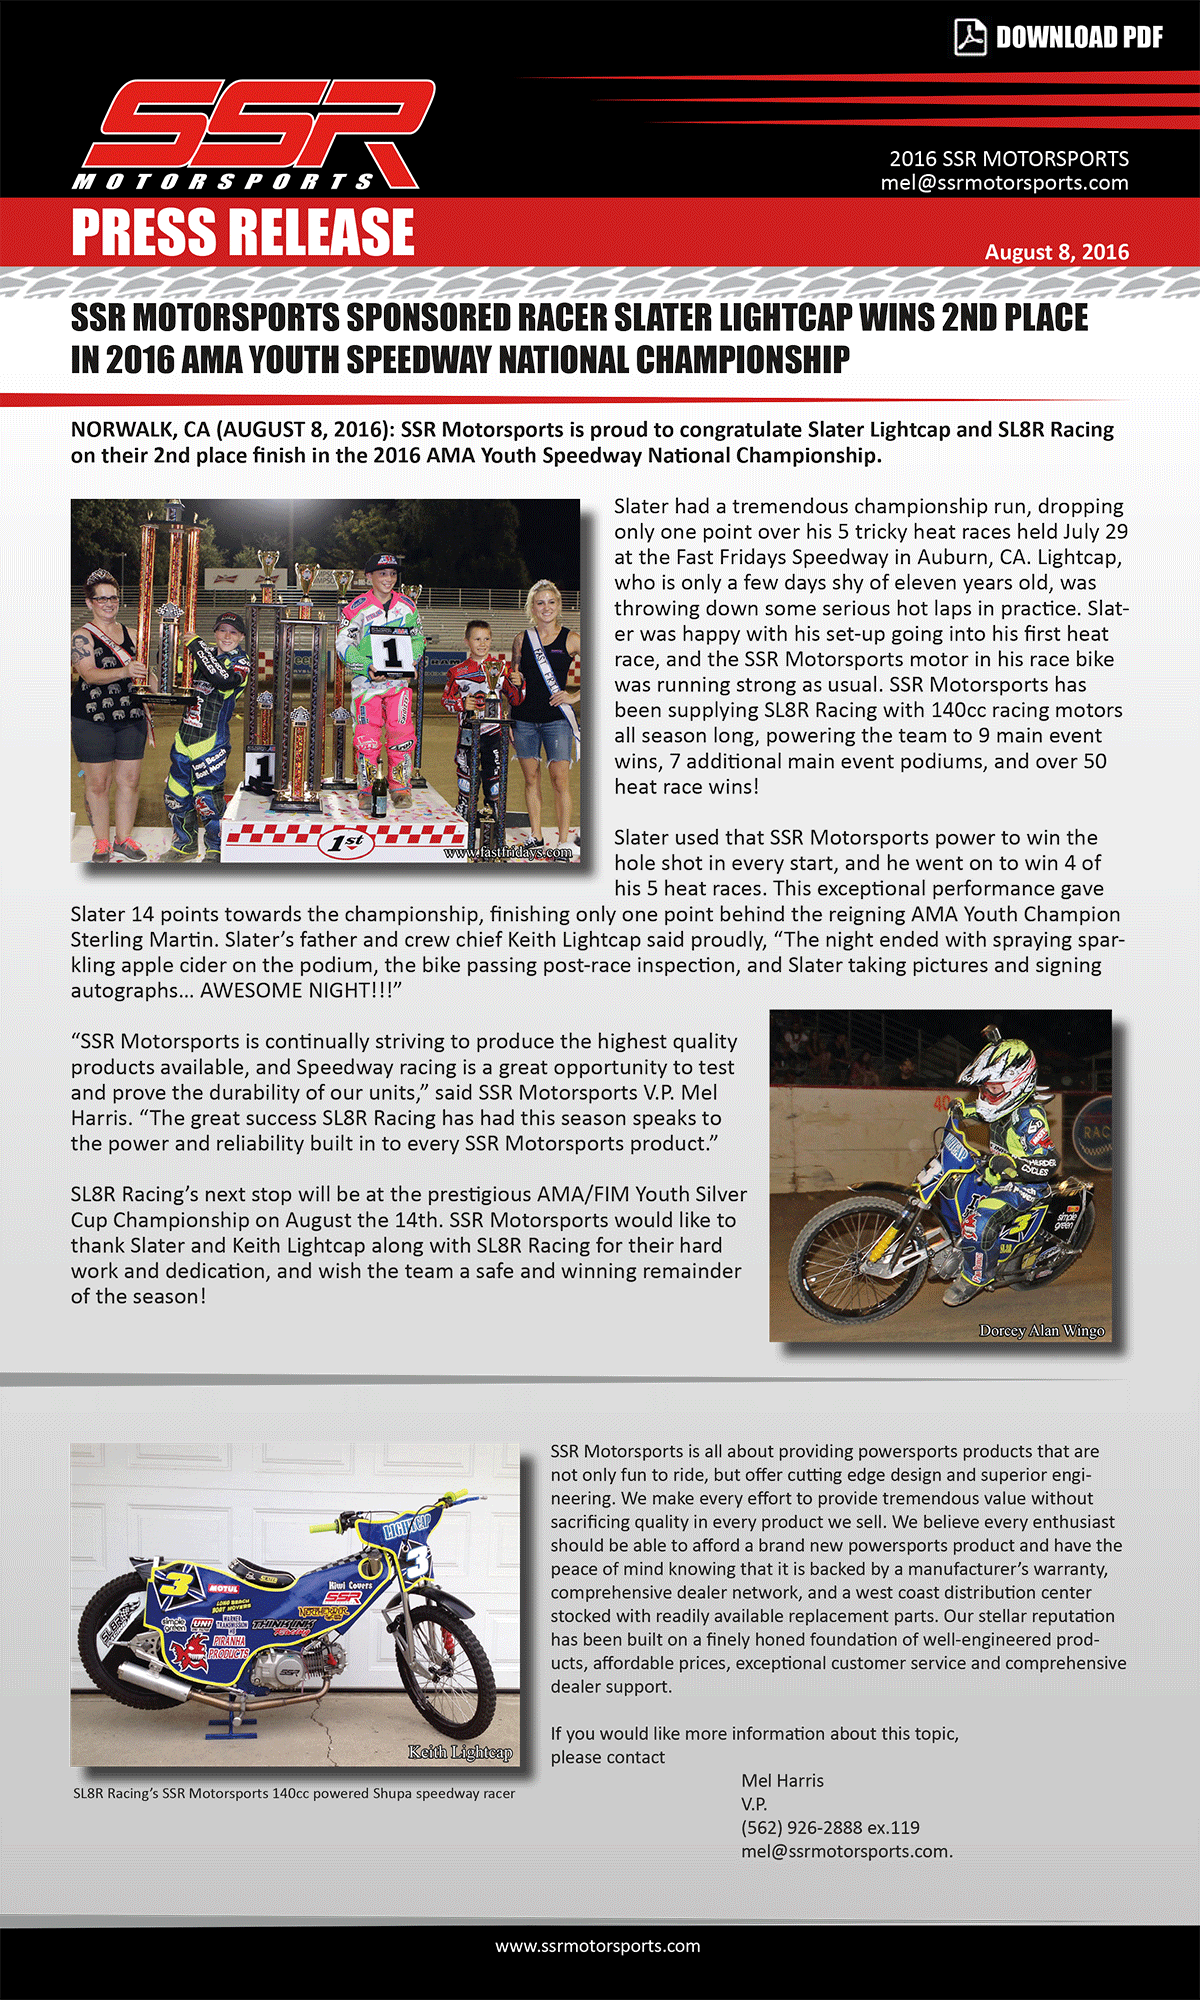 SSR MOTORSPORTS SPONSORED RACER SLATER LIGHTCAP WINS 2ND PLACE IN 2016 AMA YOUTH SPEEDWAY NATIONAL CHAMPIONSHIP